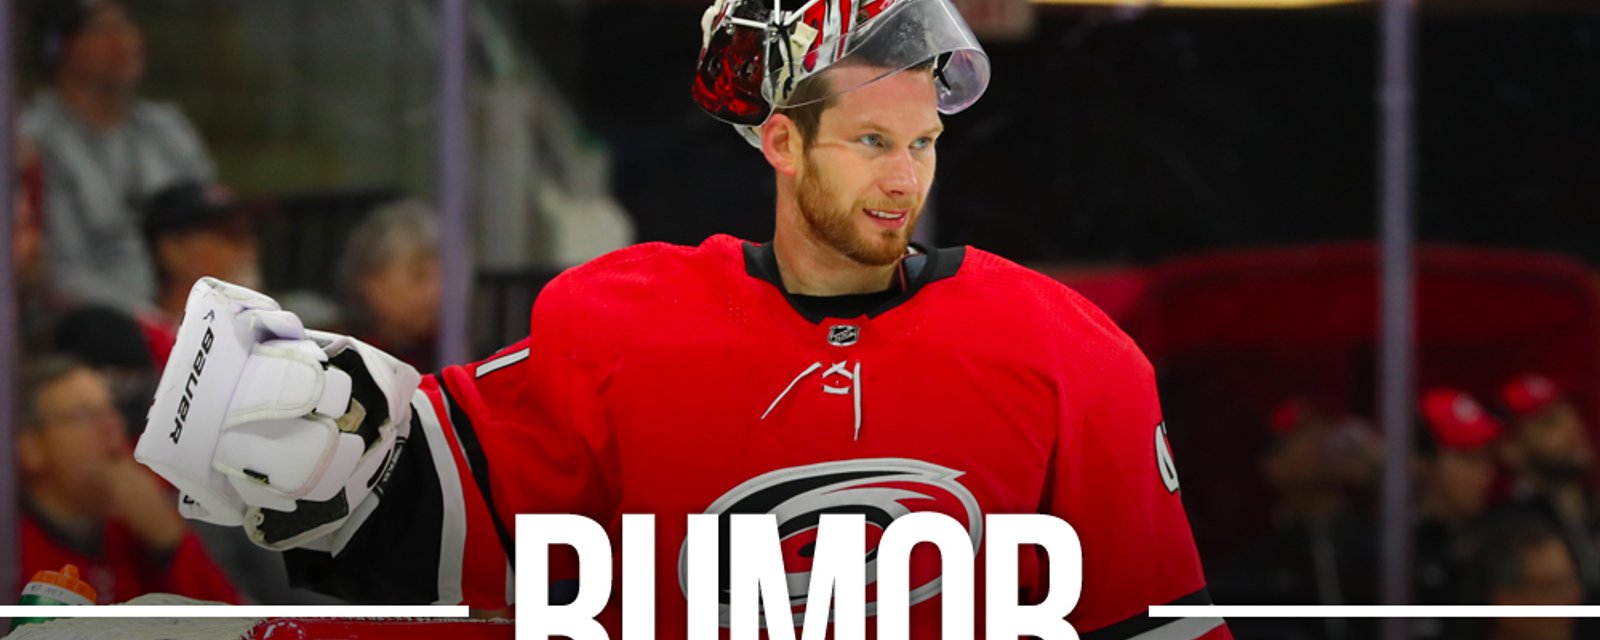 Rumor: Reimer reportedly headed to Stanley Cup contender